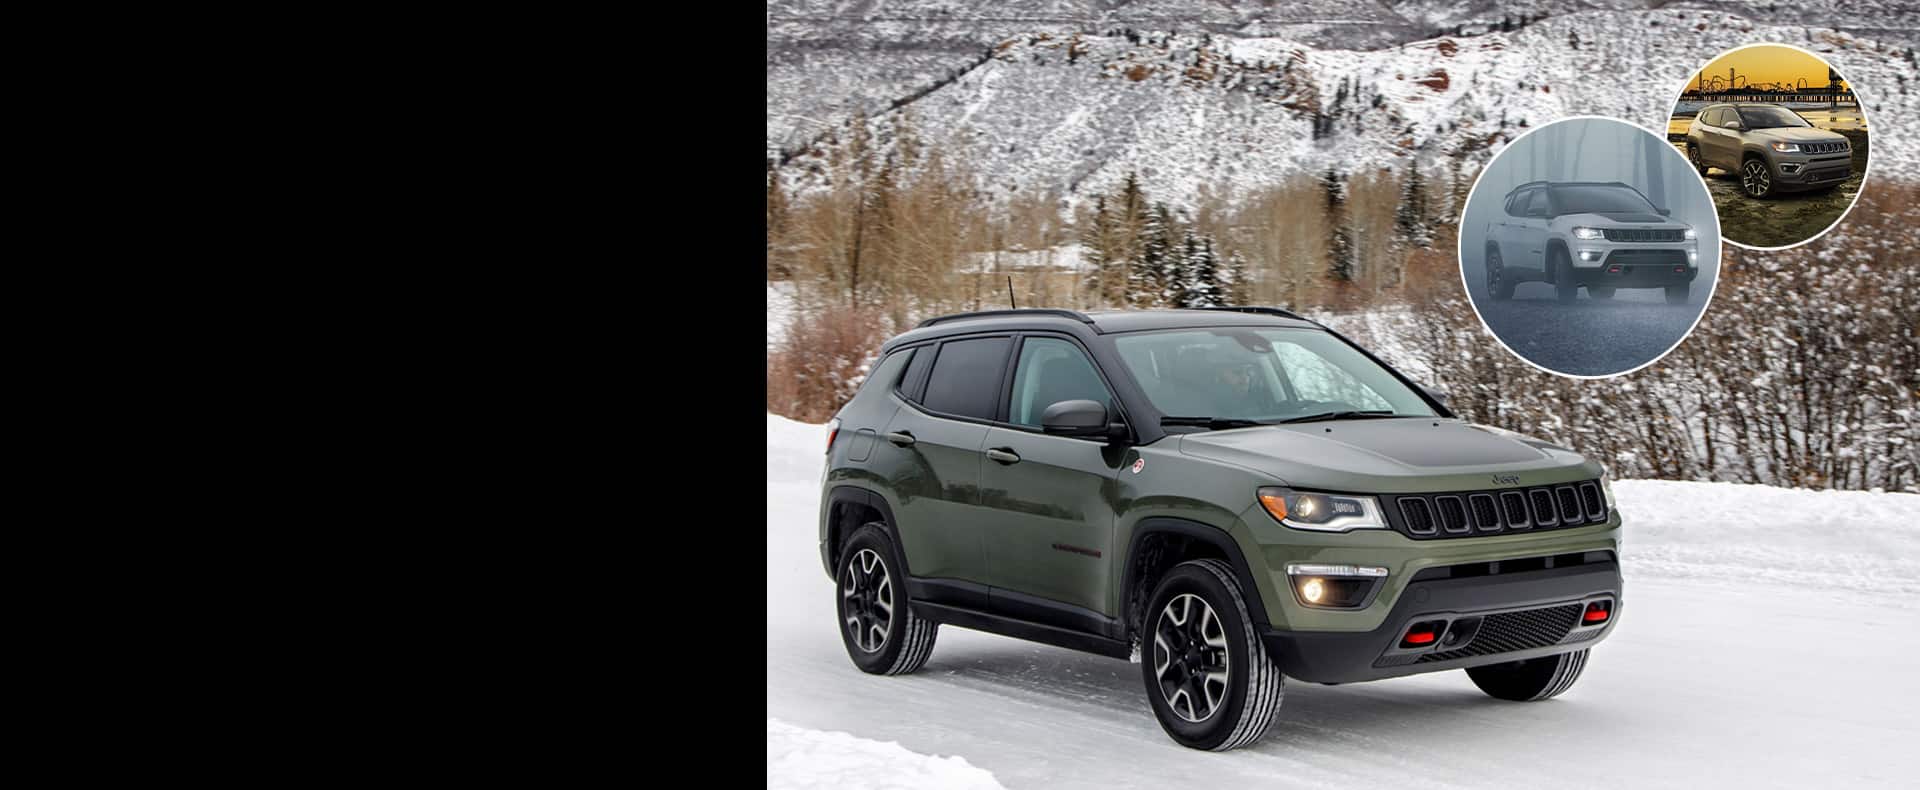 2021 Jeep Compass on packed snow. Inset images show Compass in foggy conditions and parked beside a river